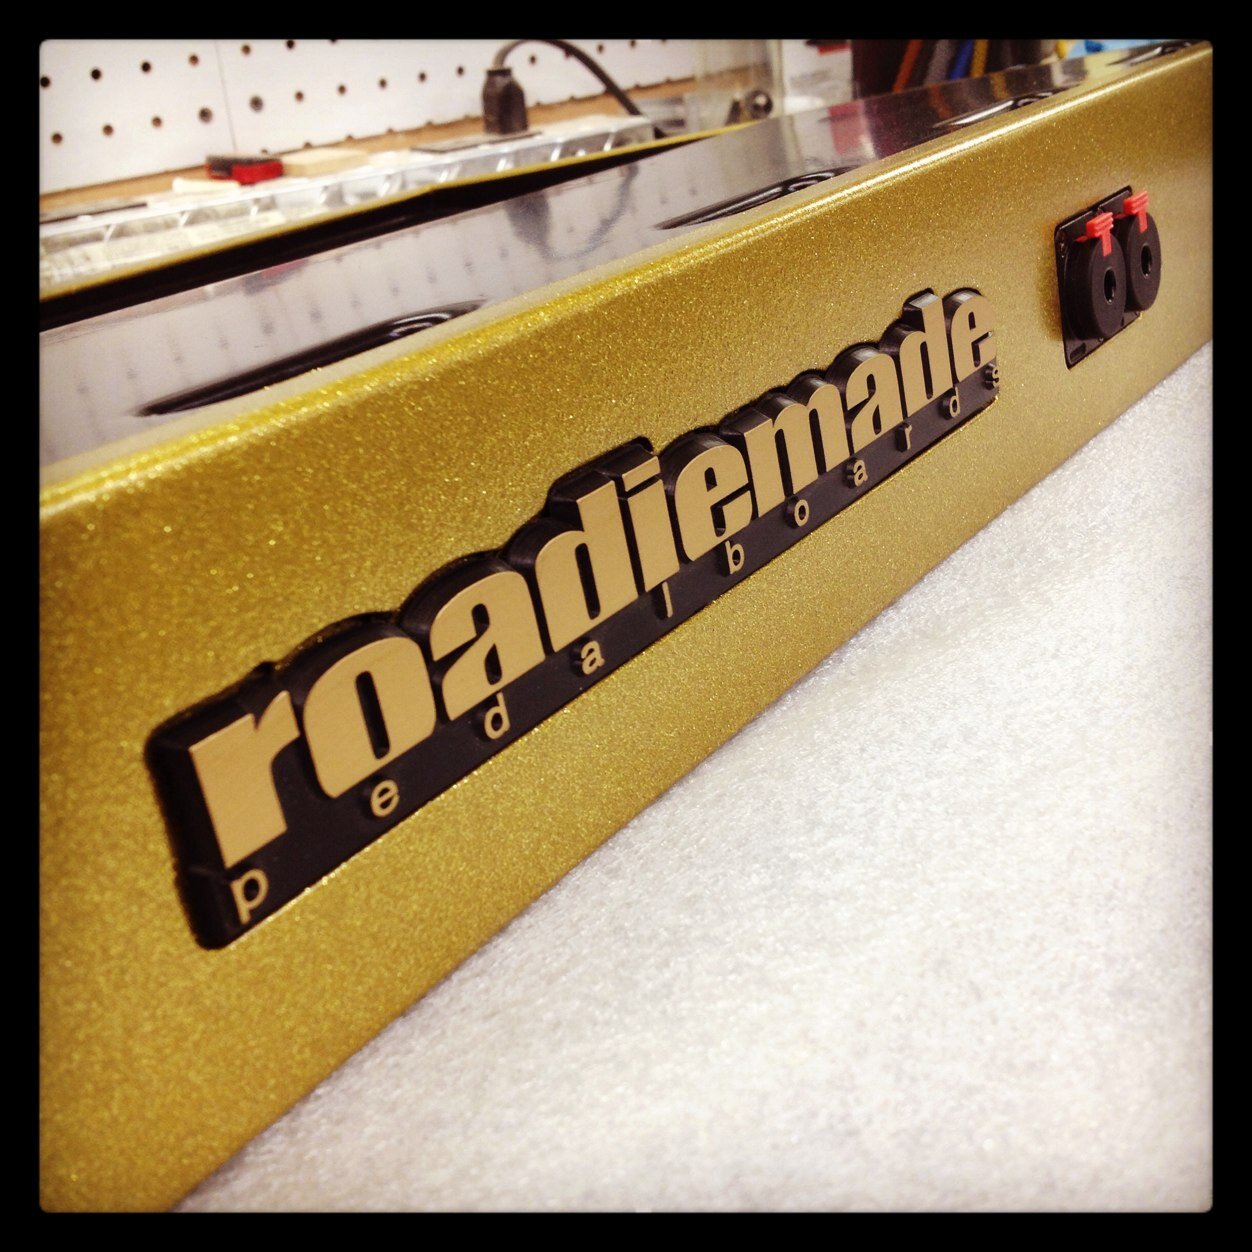 Making pedalboards and designing frontend effects chains for 30+ years. Company founded 2004 by Sean Paden.  for information email roadiemade@yahoo.com